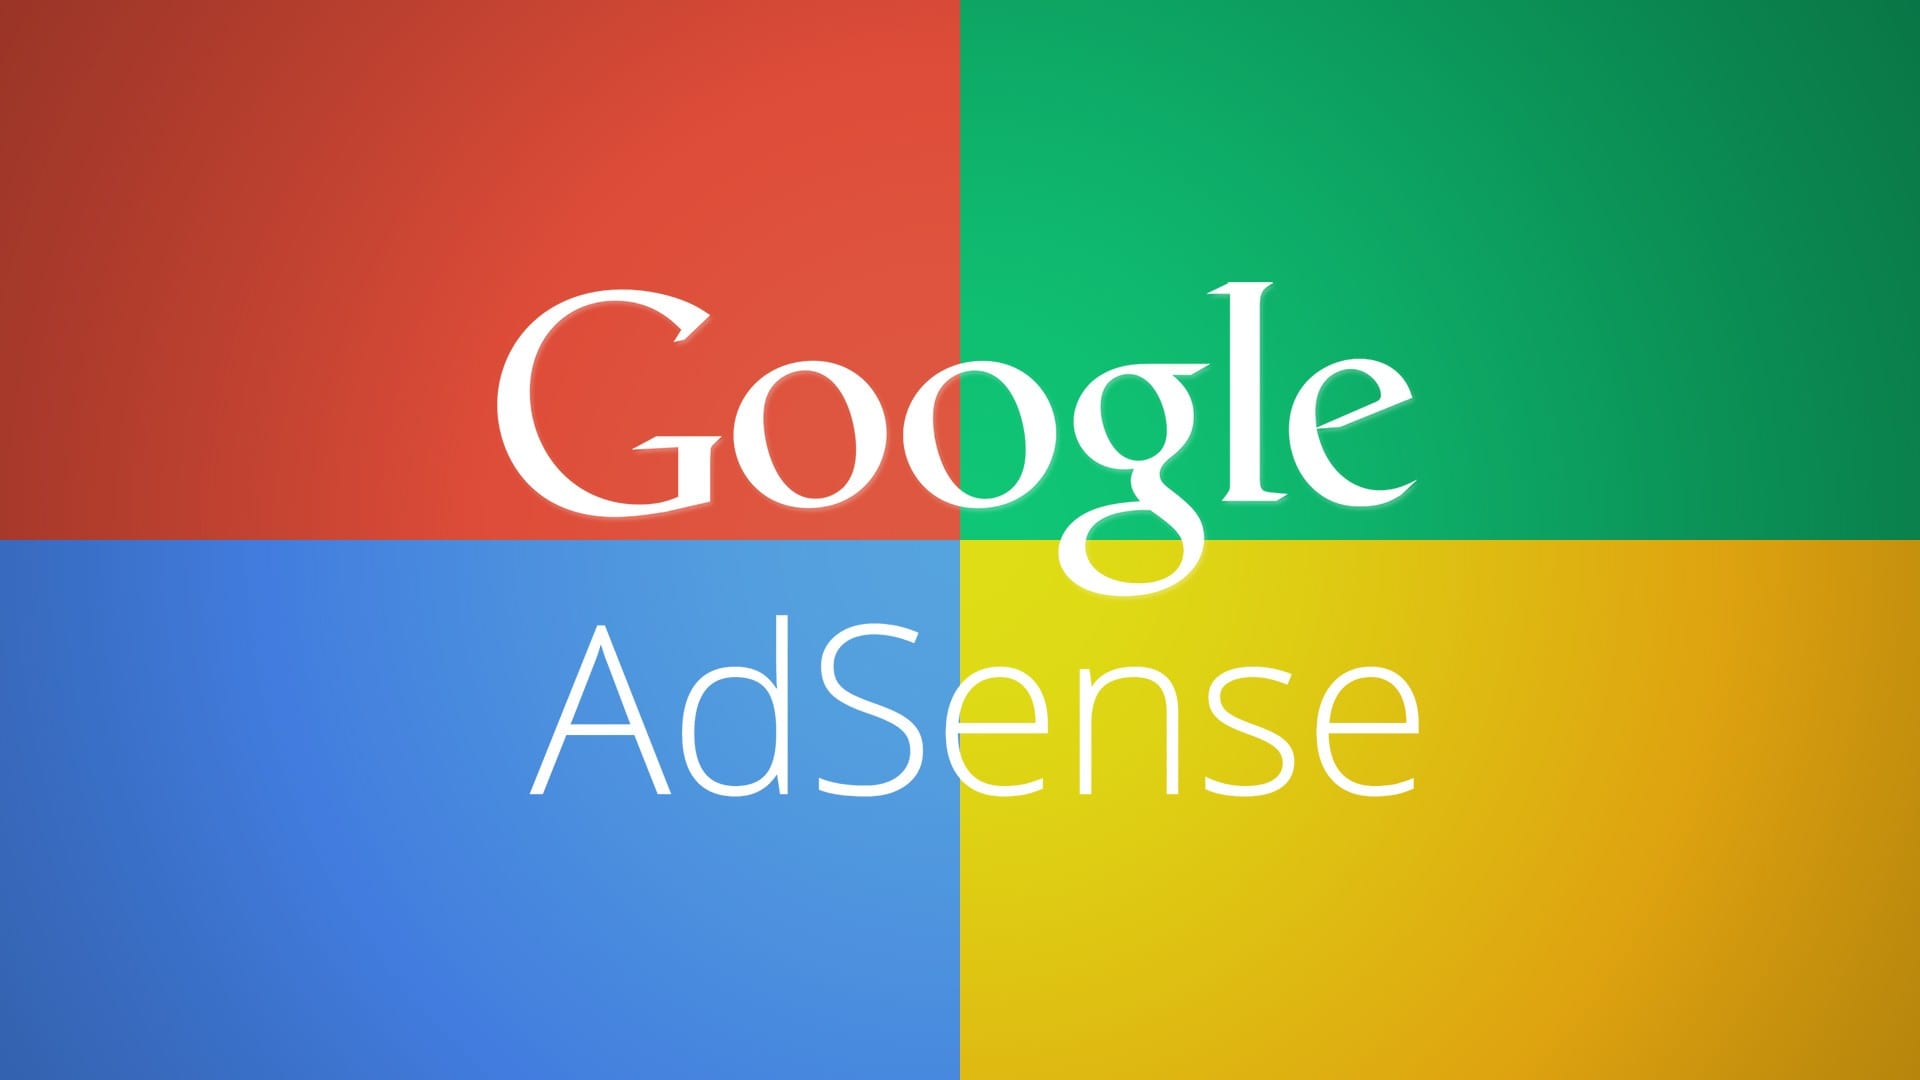 8 Tips To Increase Your Adsense Ctr (Click Through Rate) And Cpc (Cost Per Click)